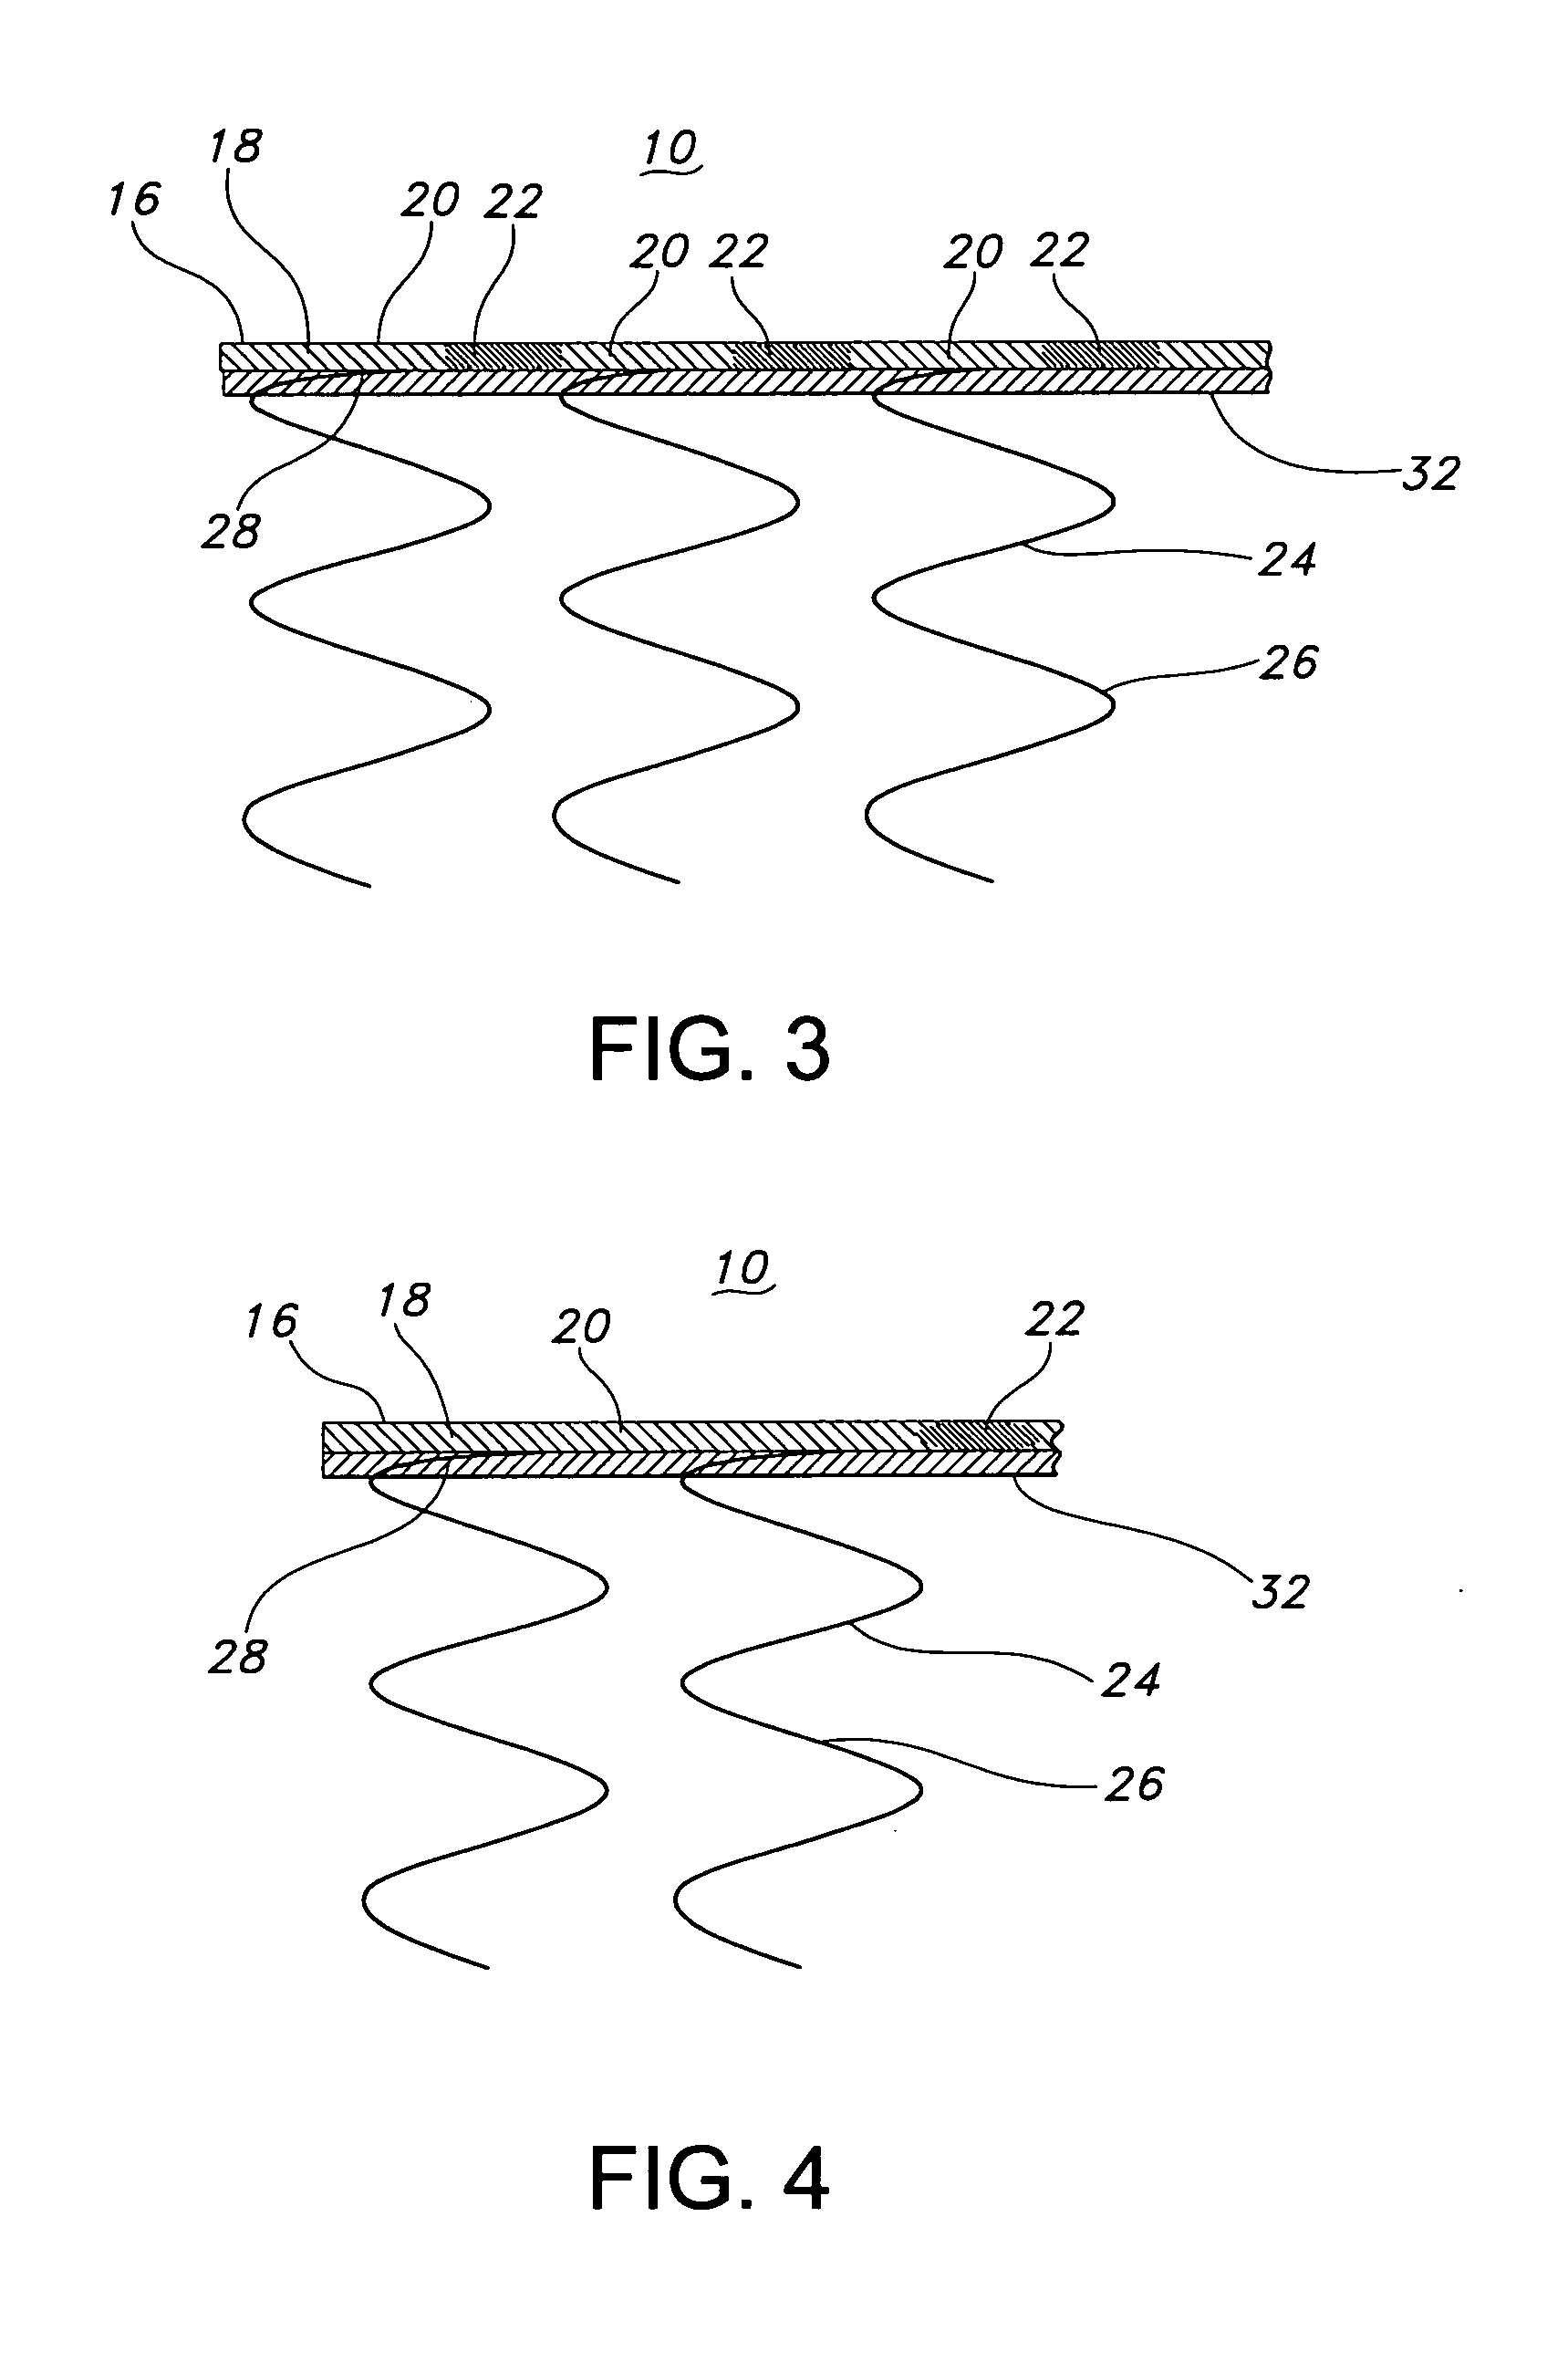 Stent-graft having flexible geometries and methods of producing the same